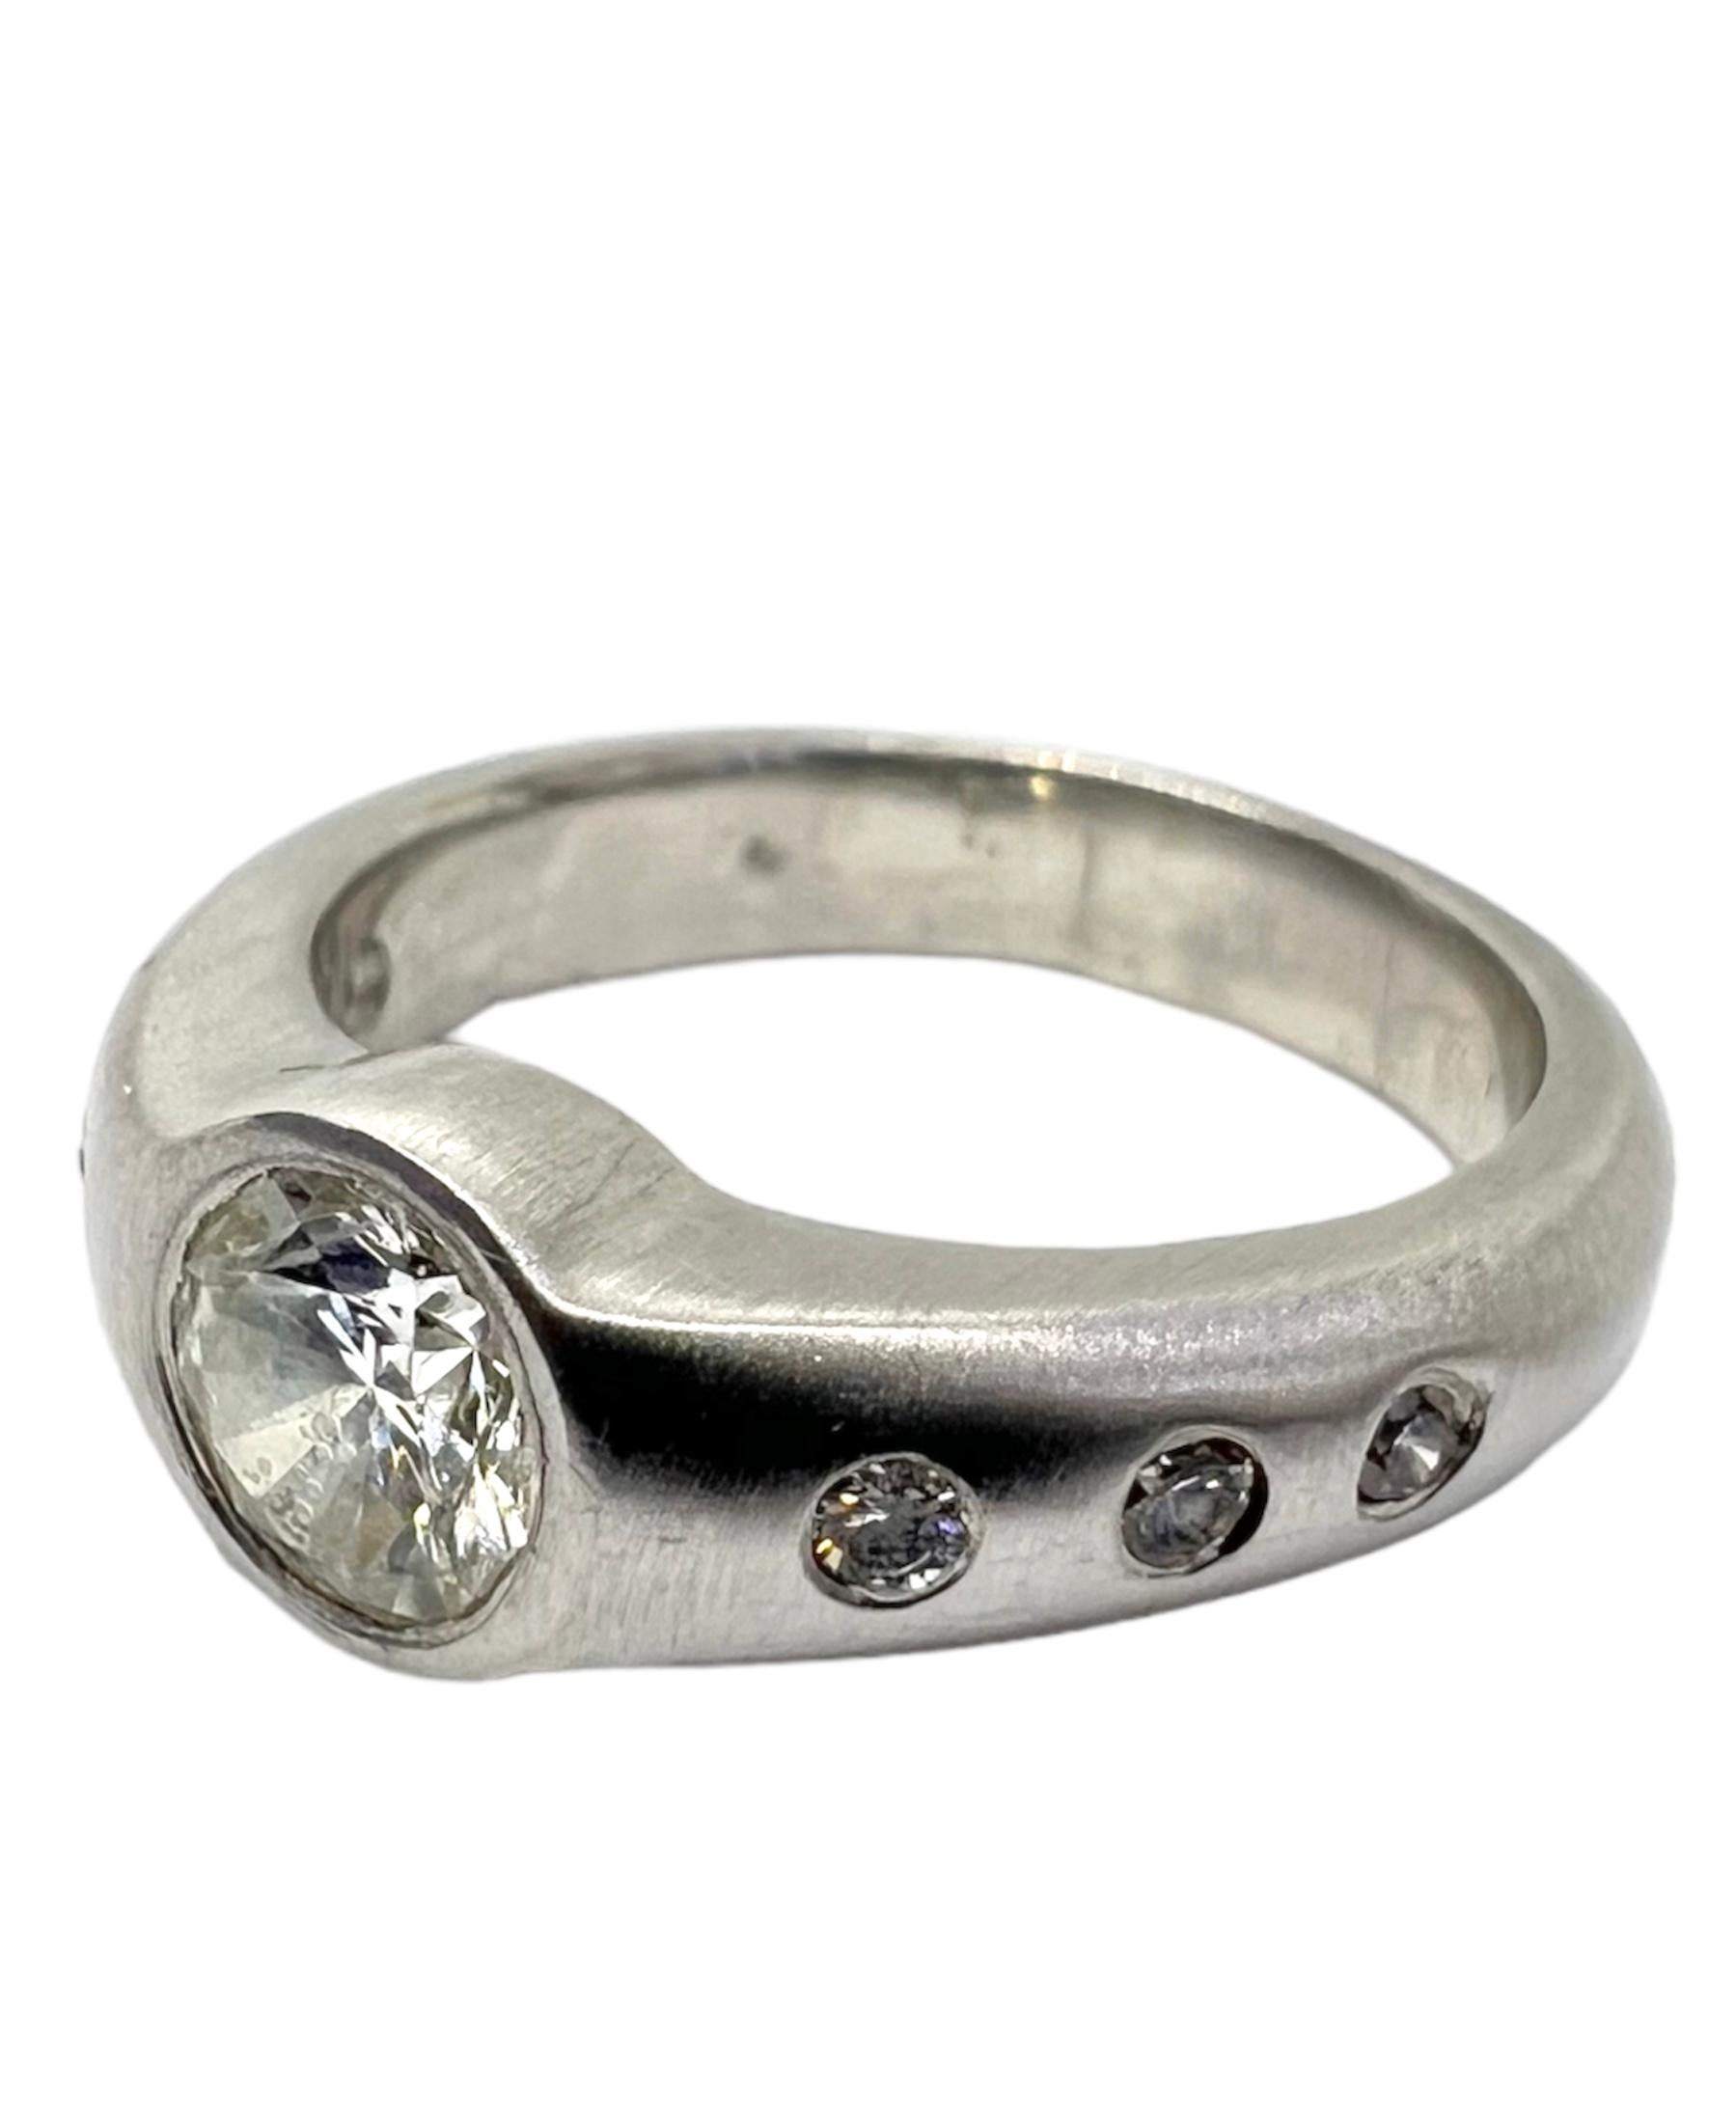 .60 carat diamond ring set in platinum.

Sophia D by Joseph Dardashti LTD has been known worldwide for 35 years and are inspired by classic Art Deco design that merges with modern manufacturing techniques.  